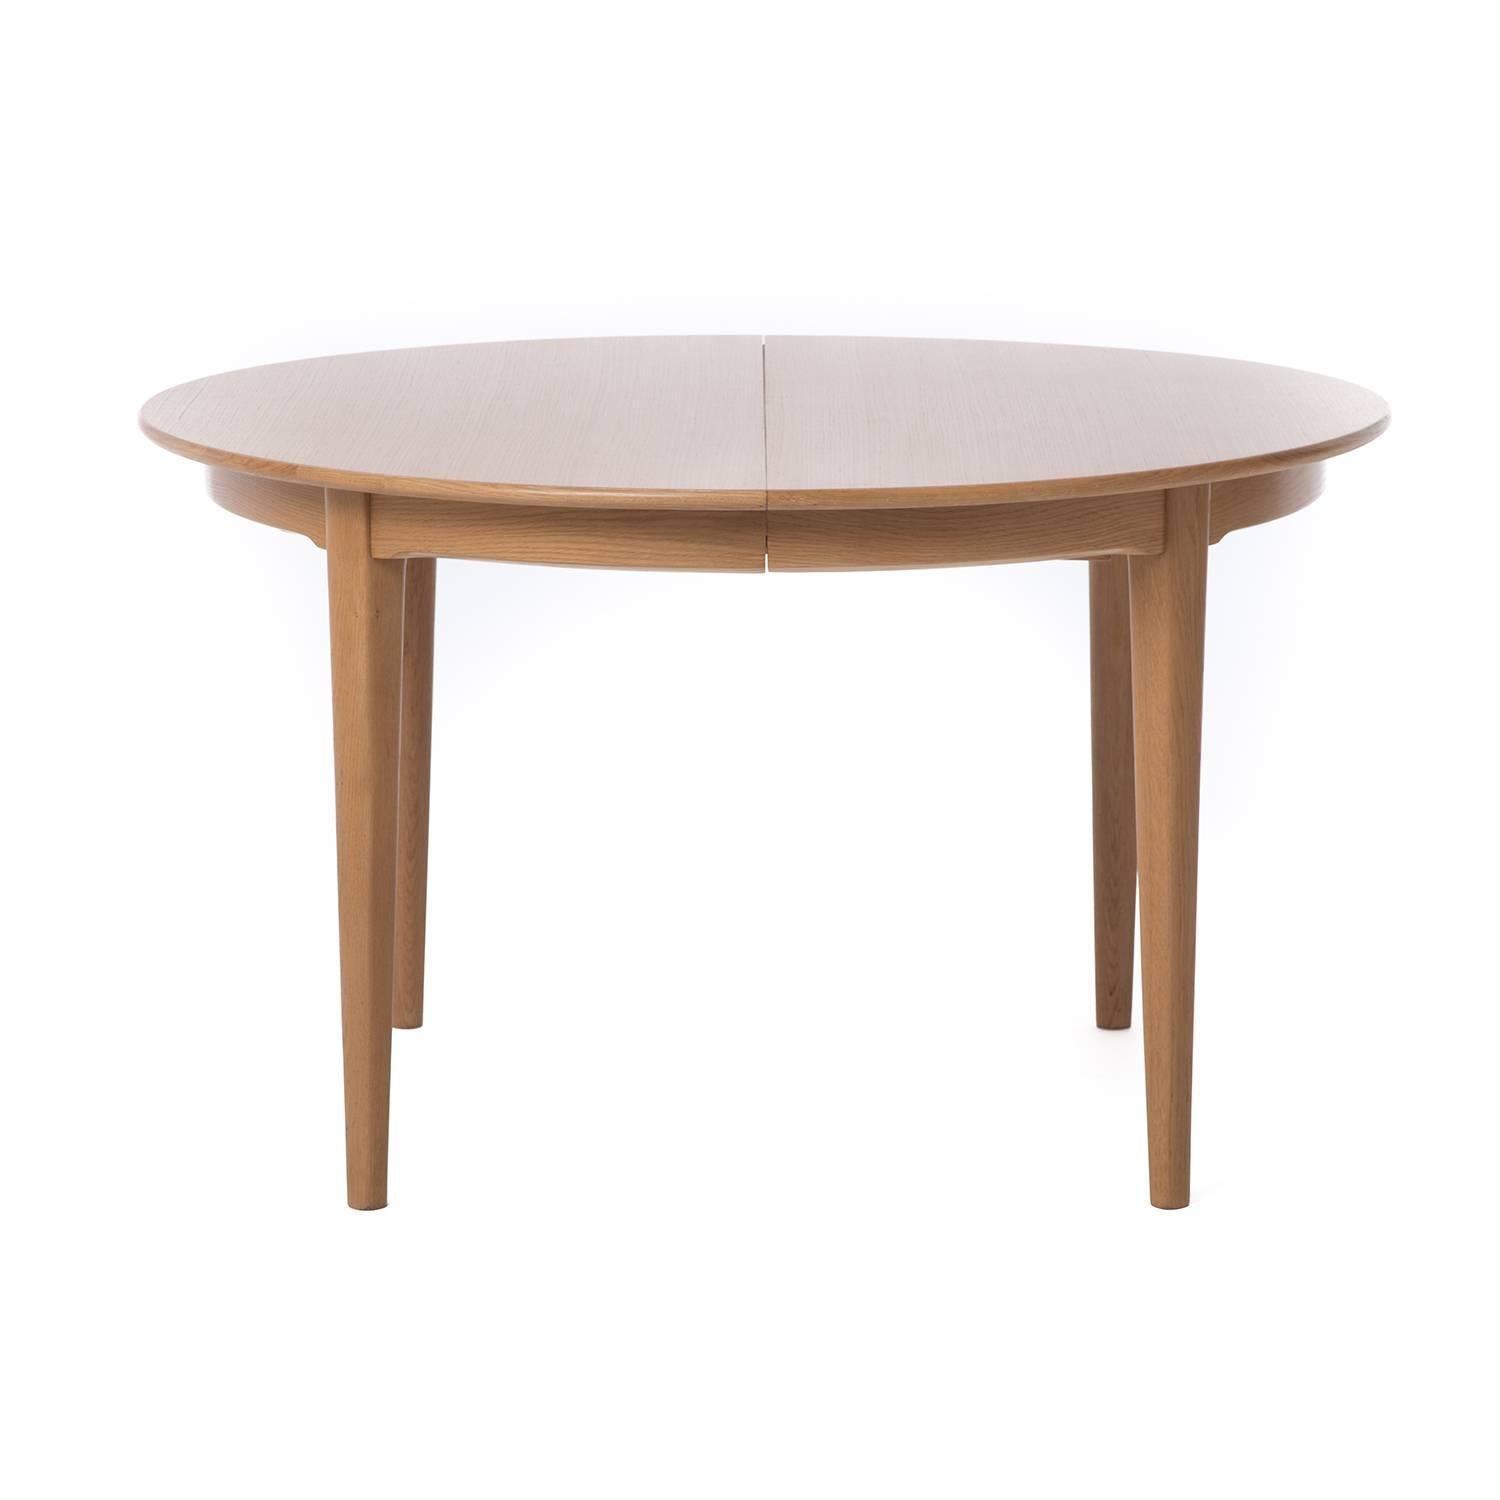 This is an extremely versatile table that is 50" in diameter at its smallest and expands to 117" long to seat 12 people. In a lovely warm white oak. 

Professional, skilled furniture restoration is an integral part of what we do every